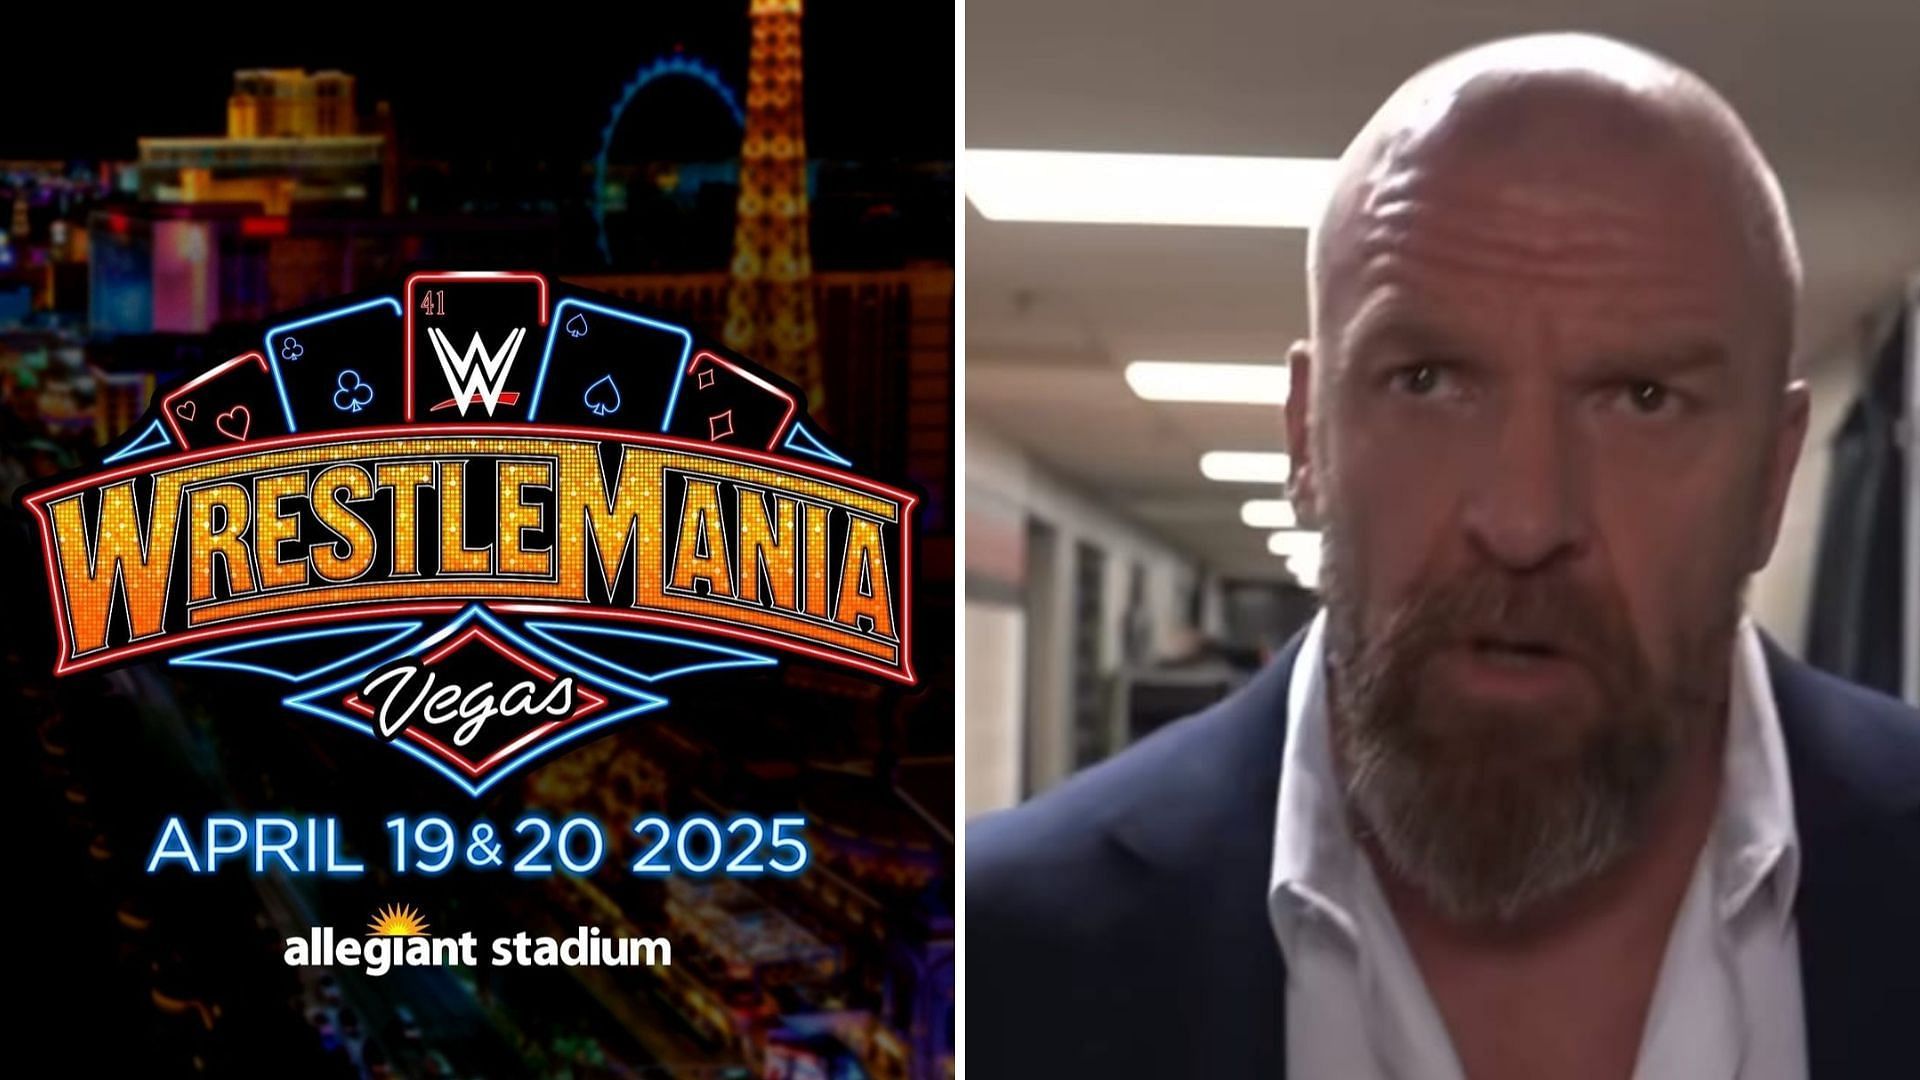 WrestleMania 41 is scheduled for April 19th and 20th